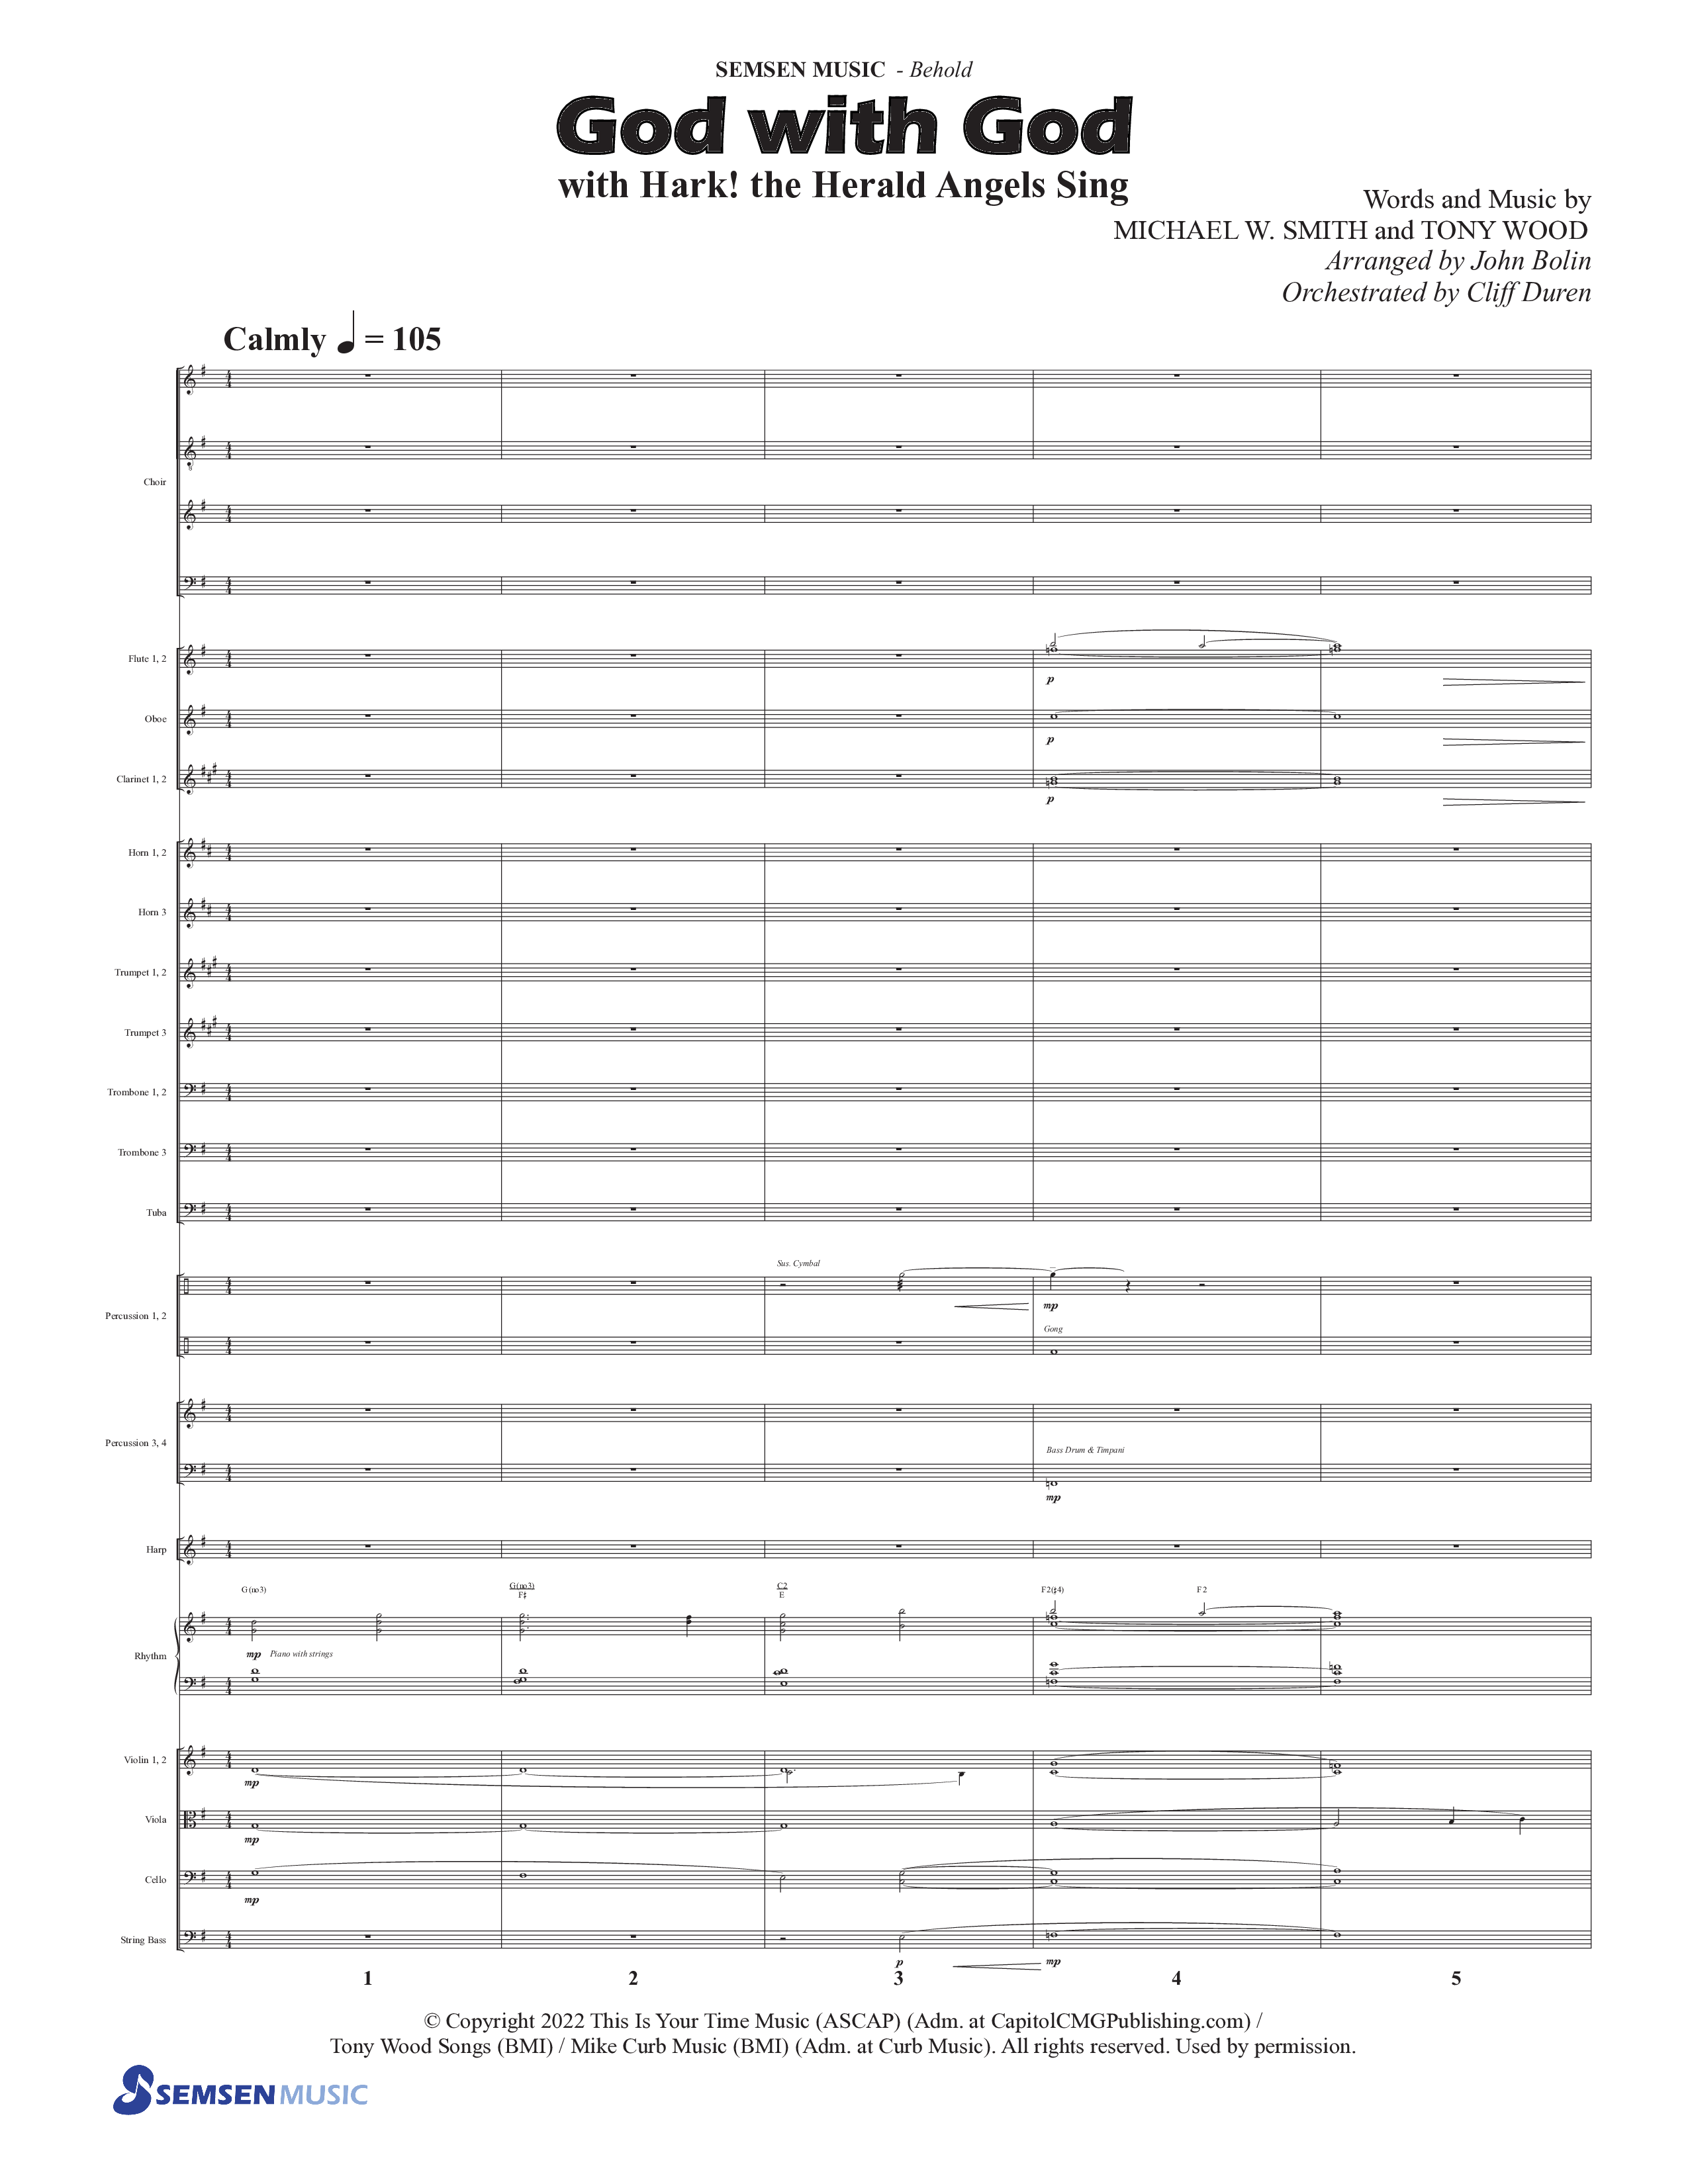 Behold (9 Song Choral Collection) Song 5 (Orchestration) (Semsen Music / Arr. John Bolin / Orch. Cliff Duren)